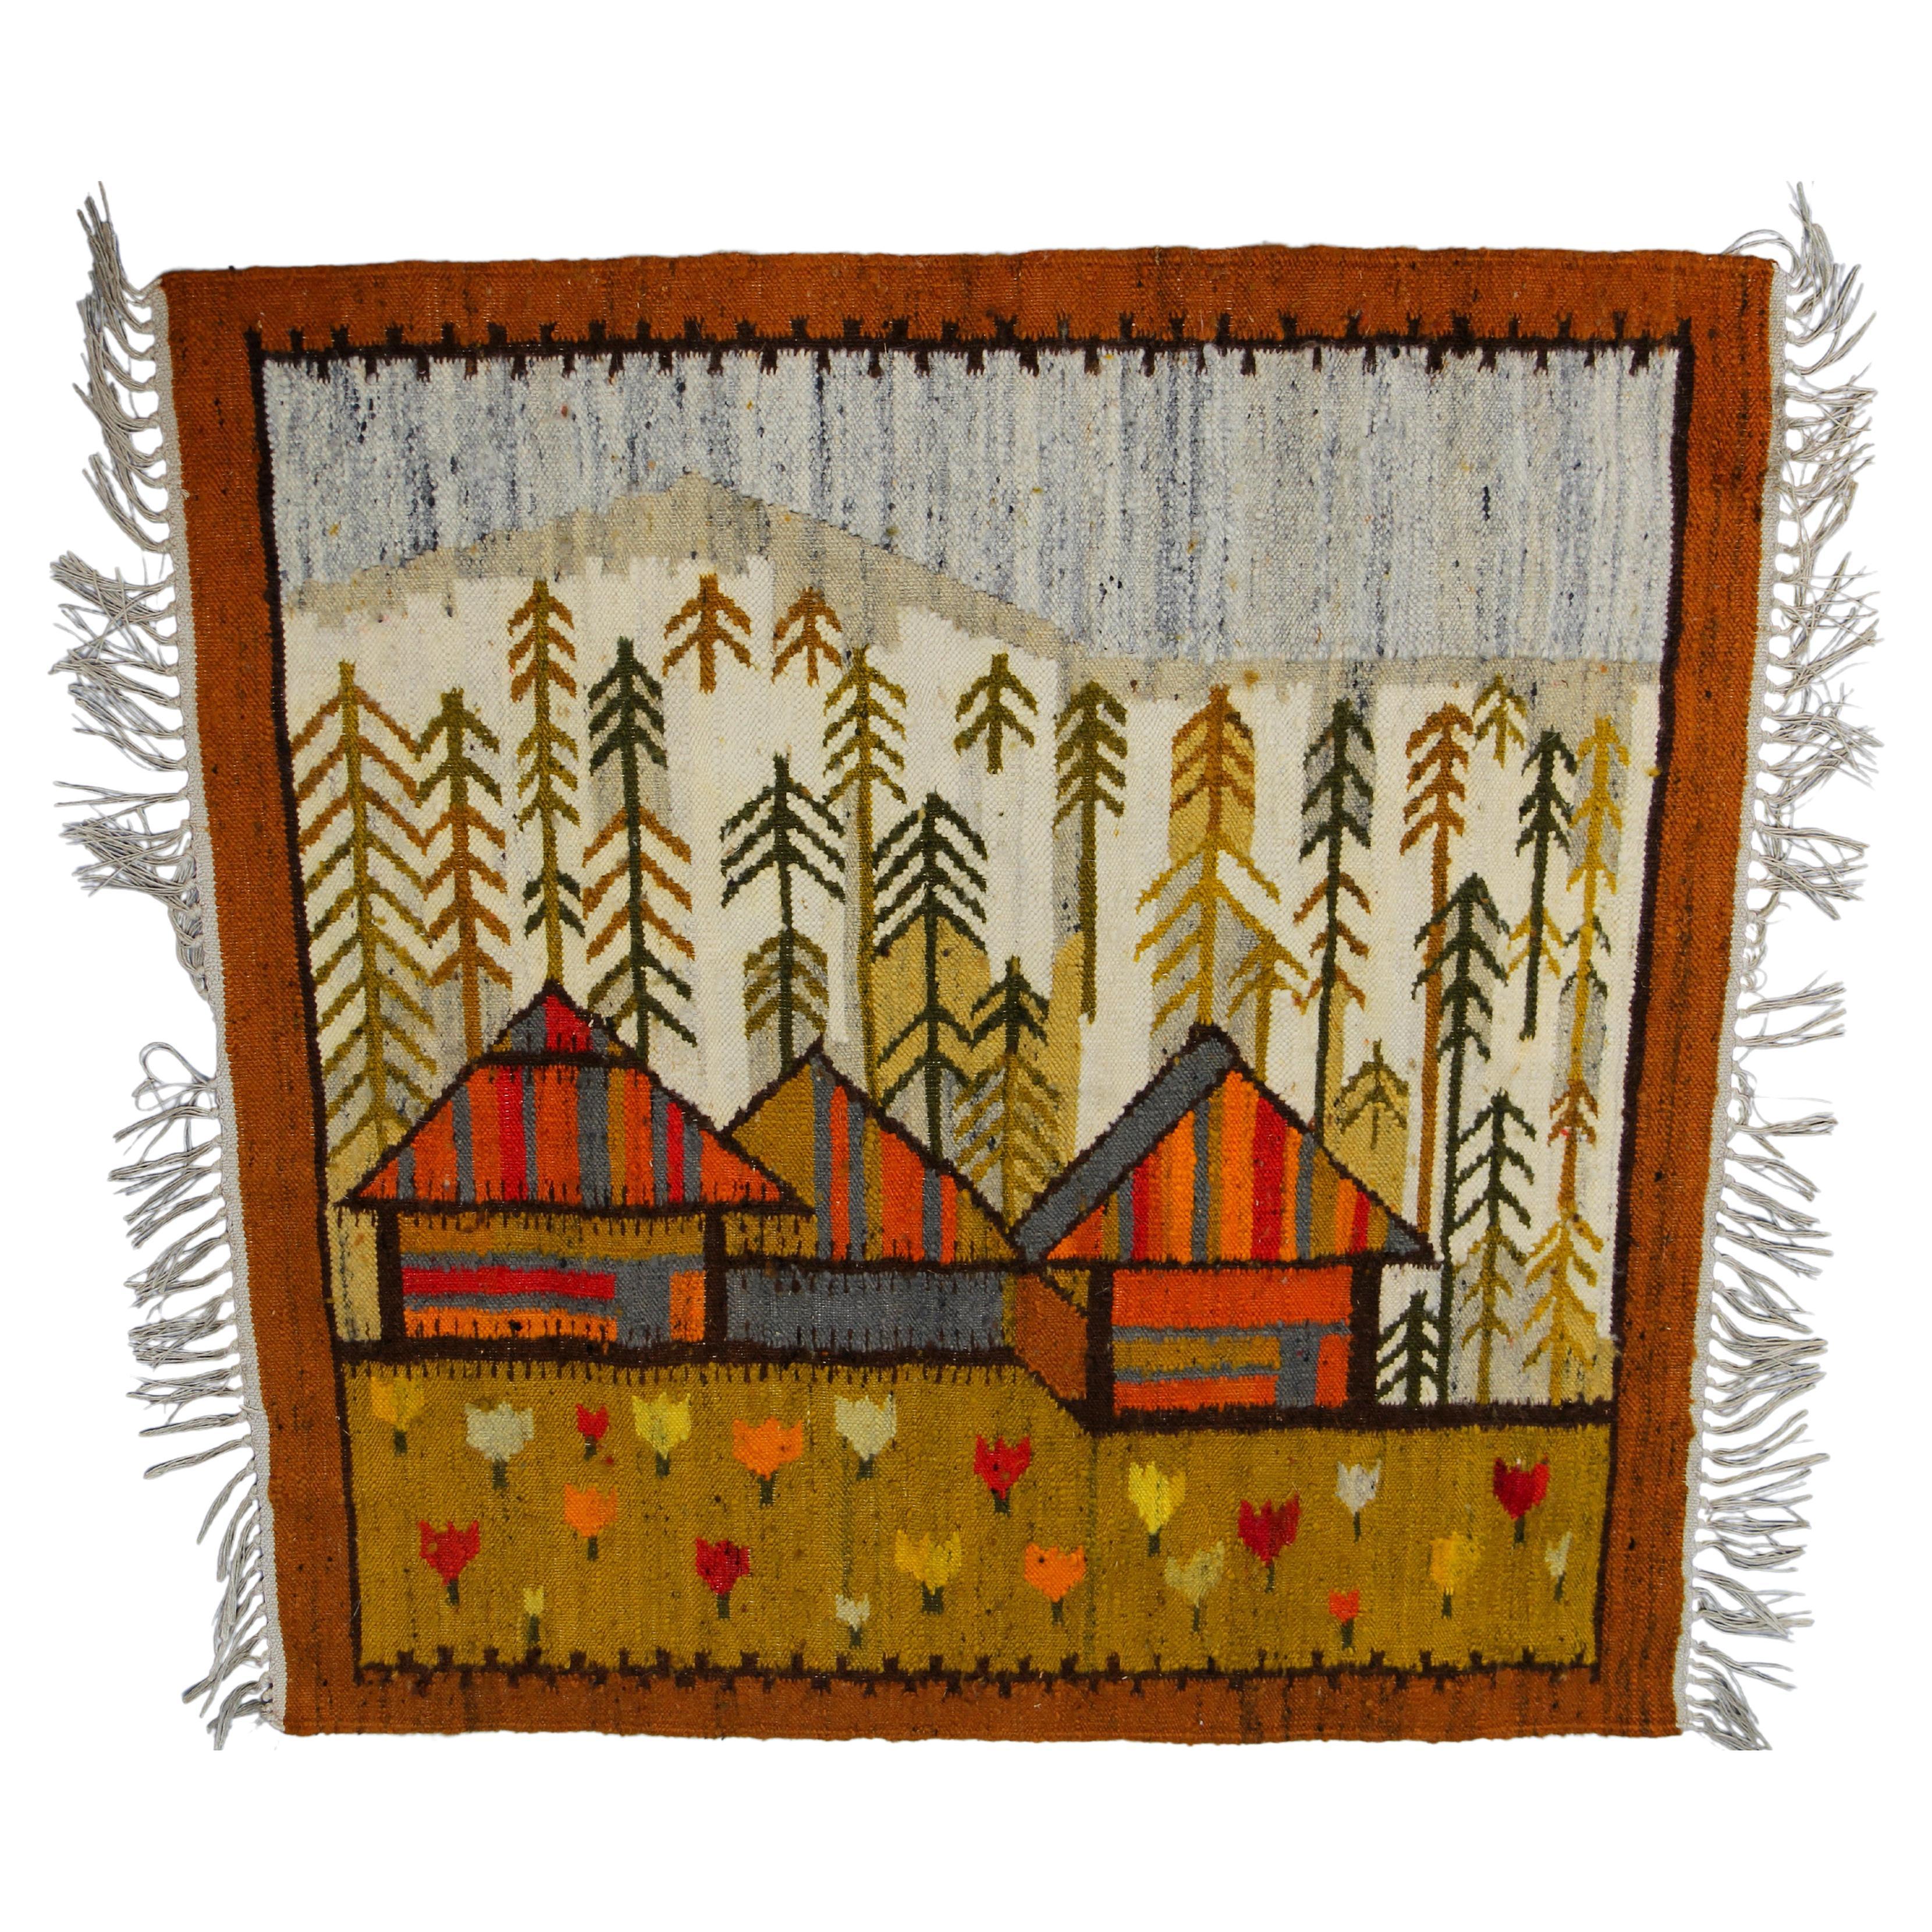 Vintage Handwoven Tapestry by Maria Janowska, Poland, Late 20th Century